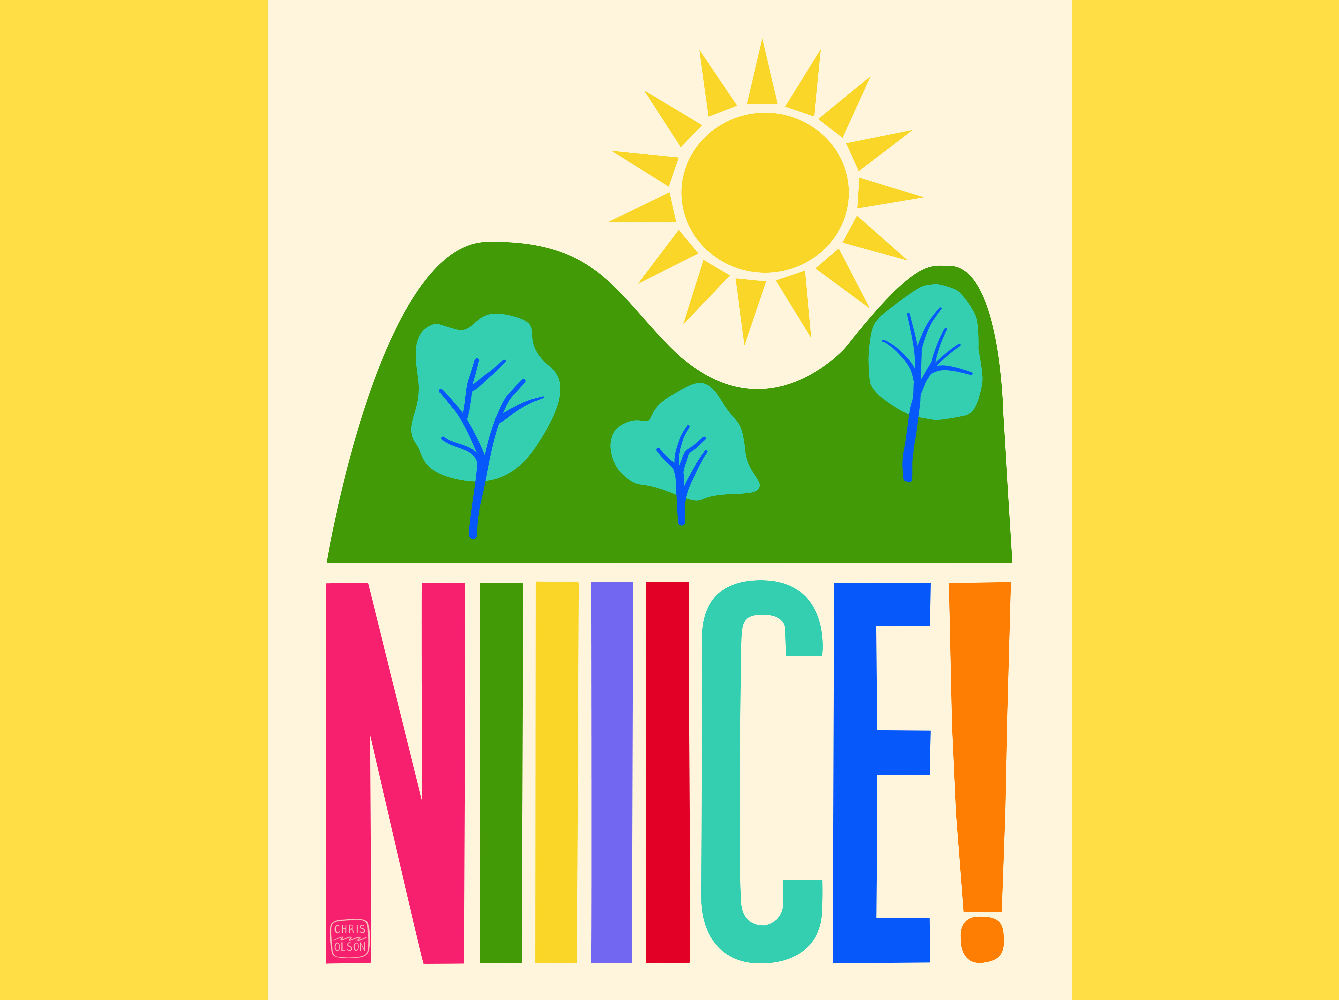 Nice Day art and hand lettering by Chris Olson